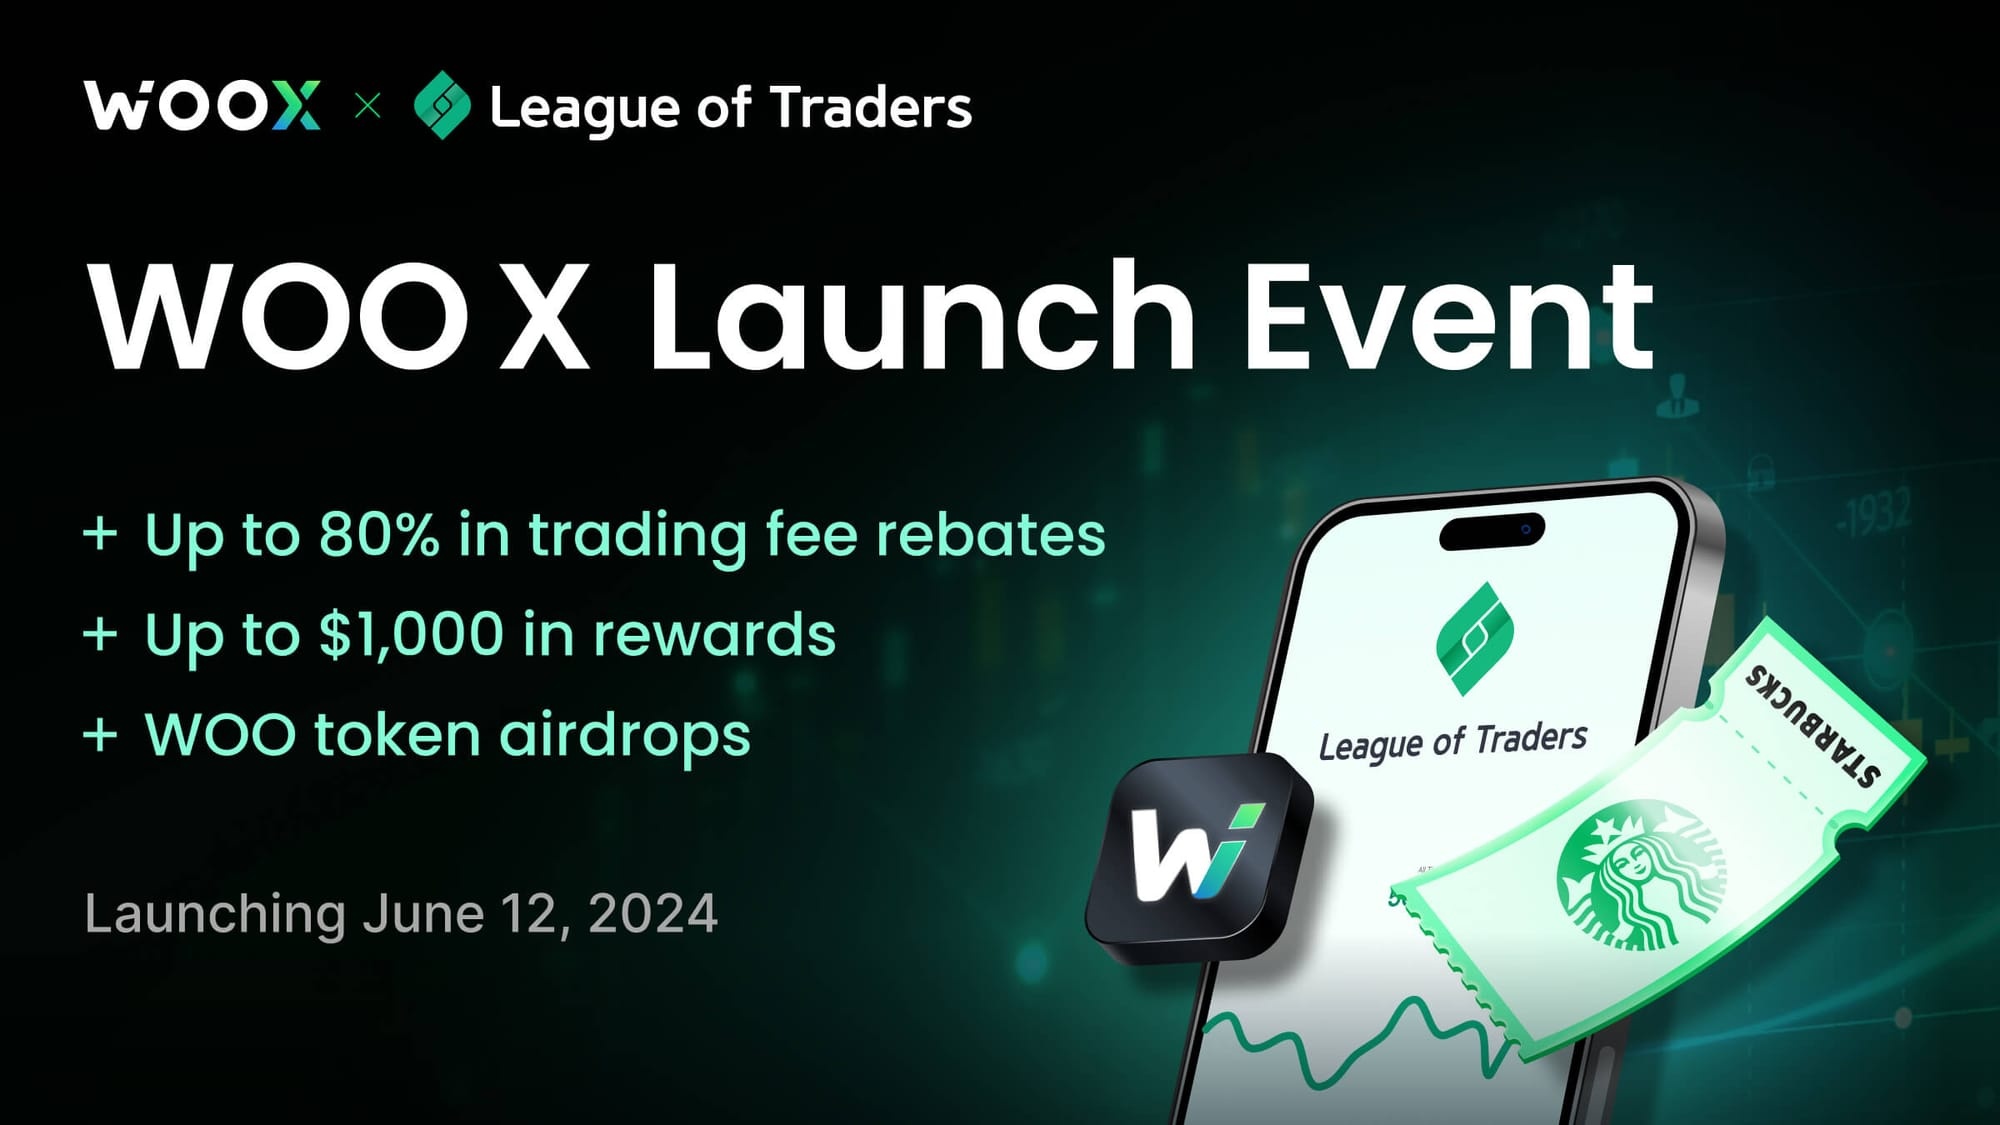 WOO X and League of Traders Forge Strategic Partnership